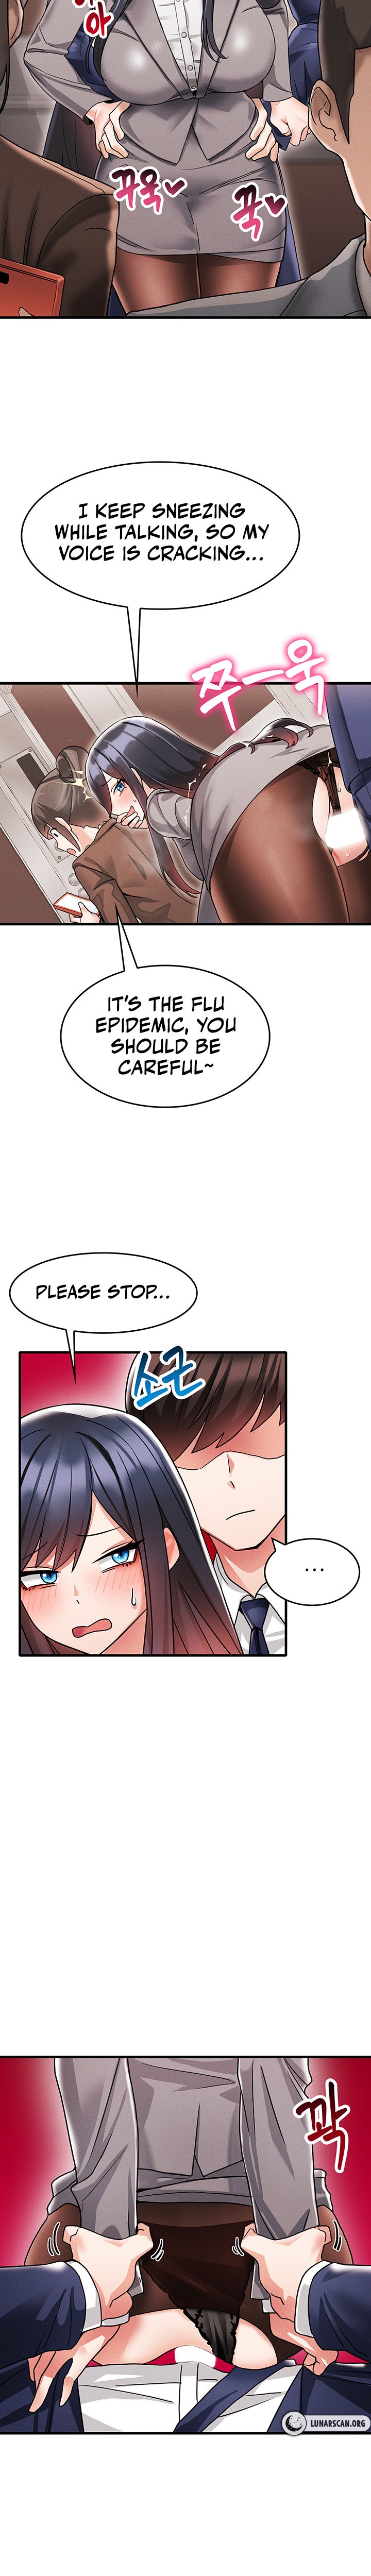 Relationship Reverse Button: Let’s Make Her Submissive - Chapter 4 Page 15